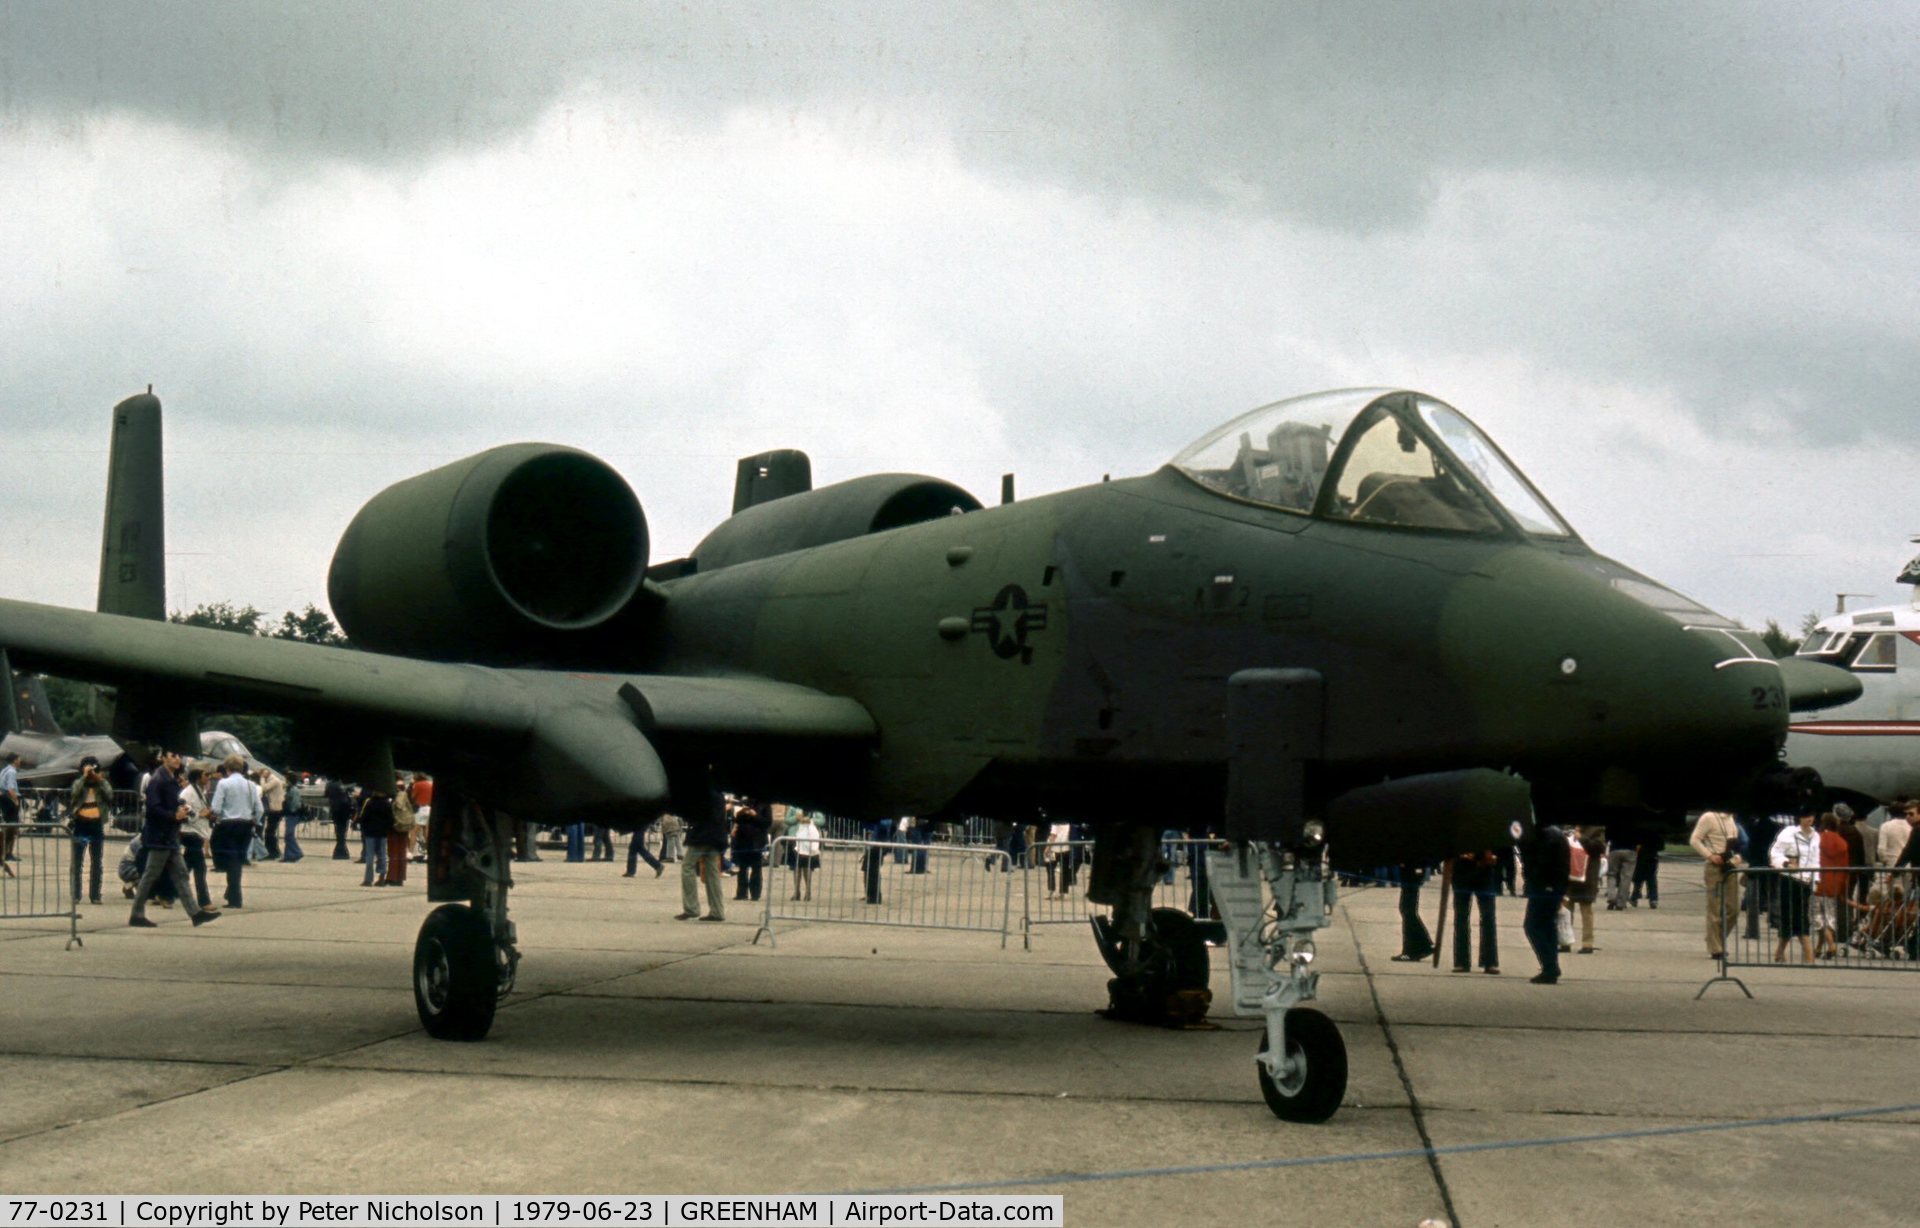 77-0231, 1977 Fairchild Republic A-10A Thunderbolt II C/N A10-0156, A-10A Thunderbolt of the 81st Tactical Fighter Wing on display at the 1979 Intnl Air Tattoo at RAF Greenham Common.